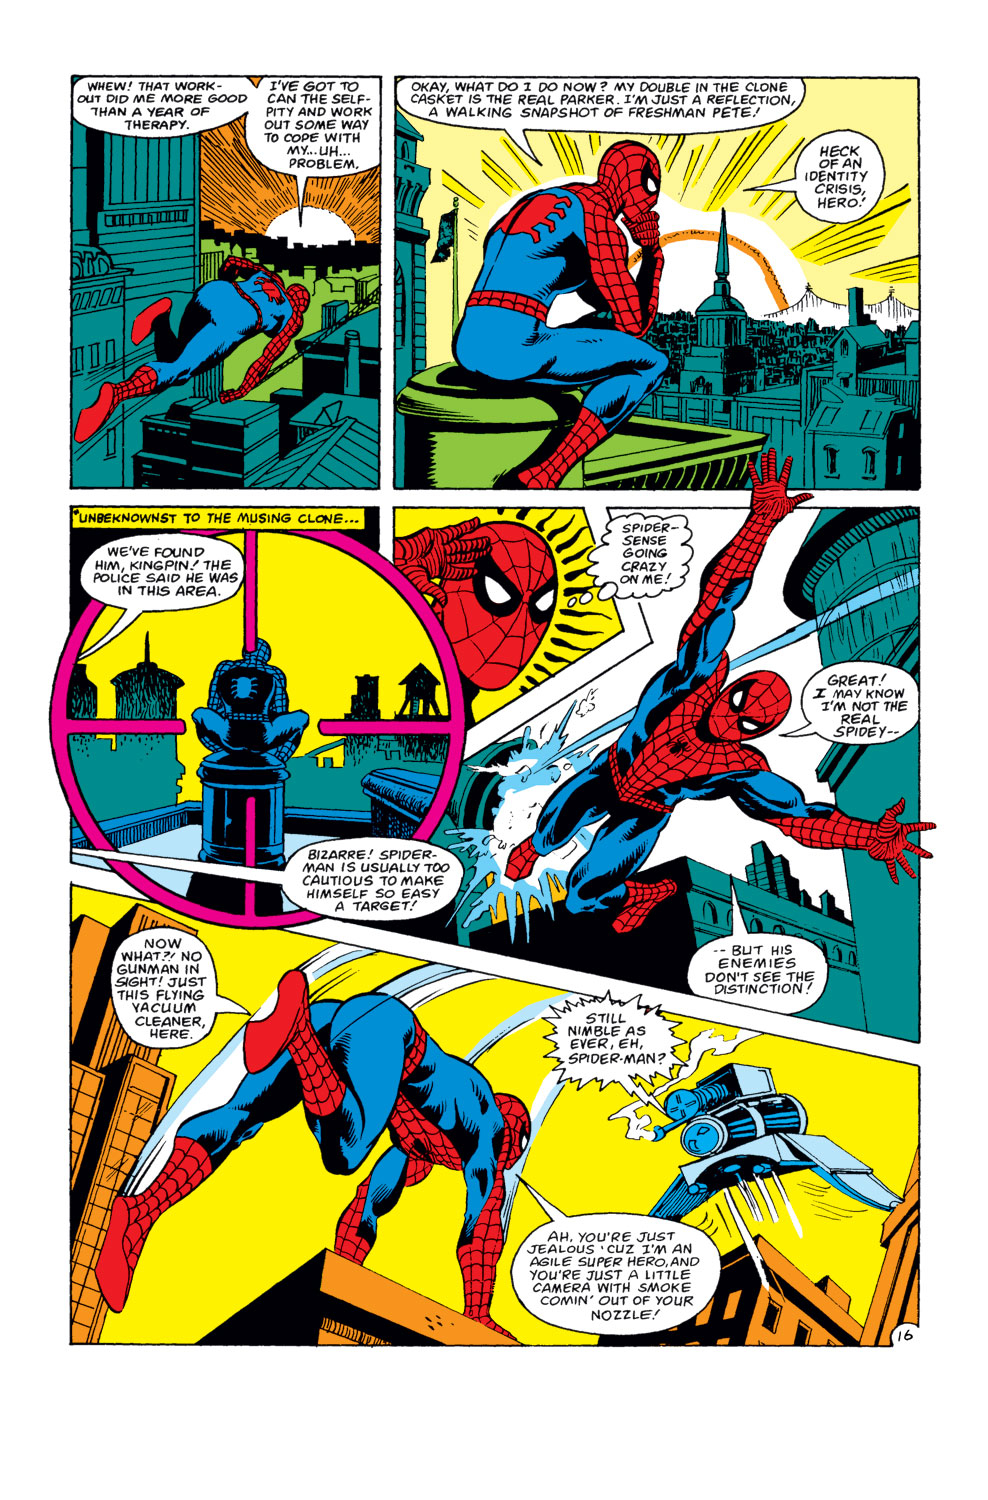 What If? (1977) issue 30 - Spider-Man's clone lived - Page 17